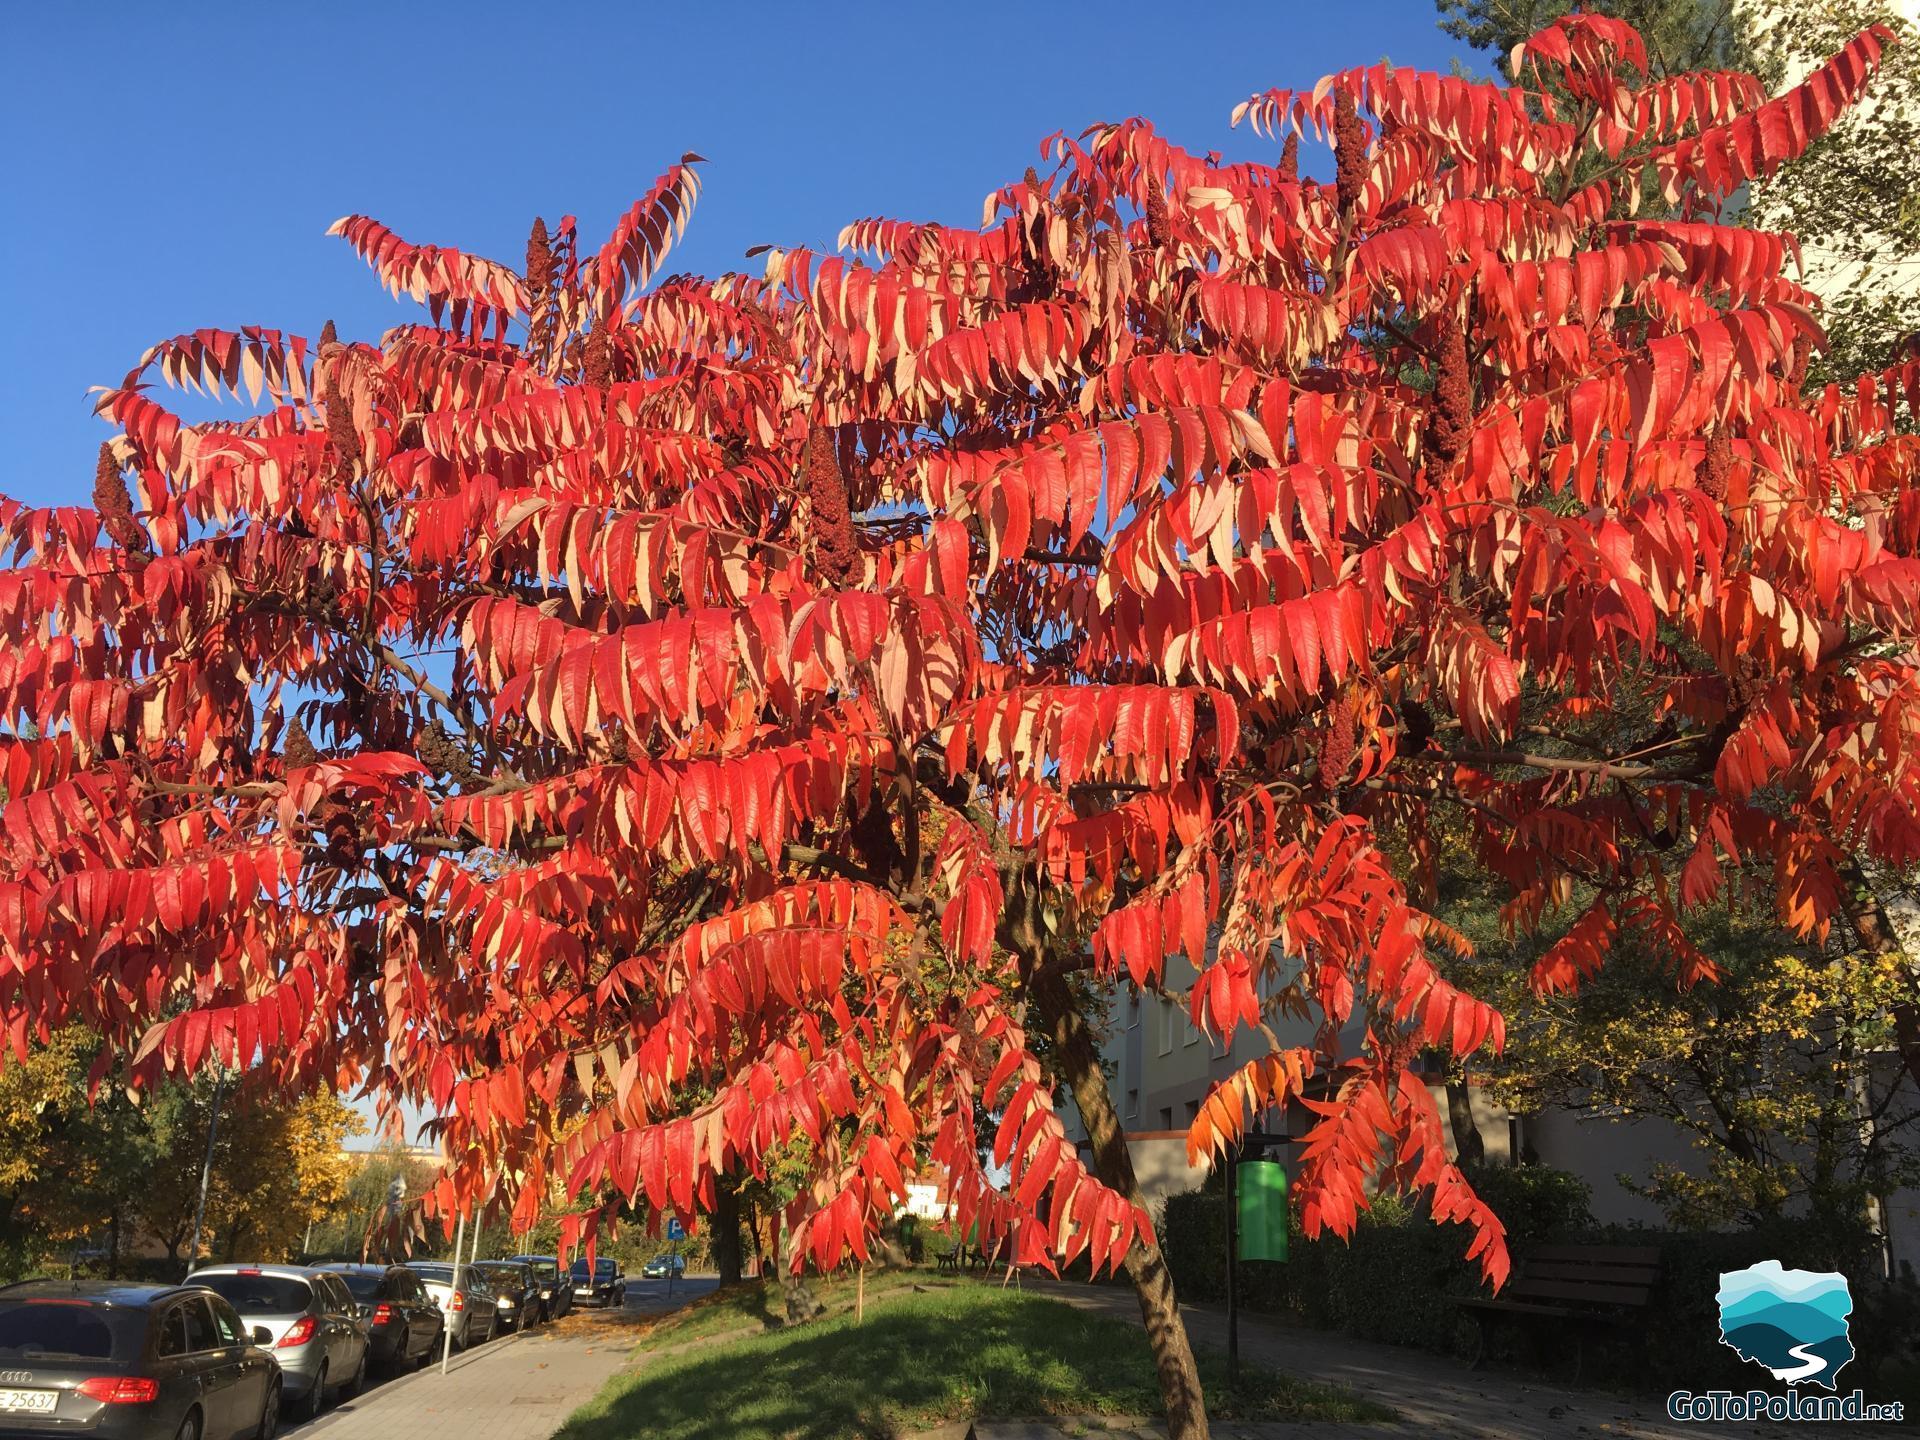 A small tree with red leaves